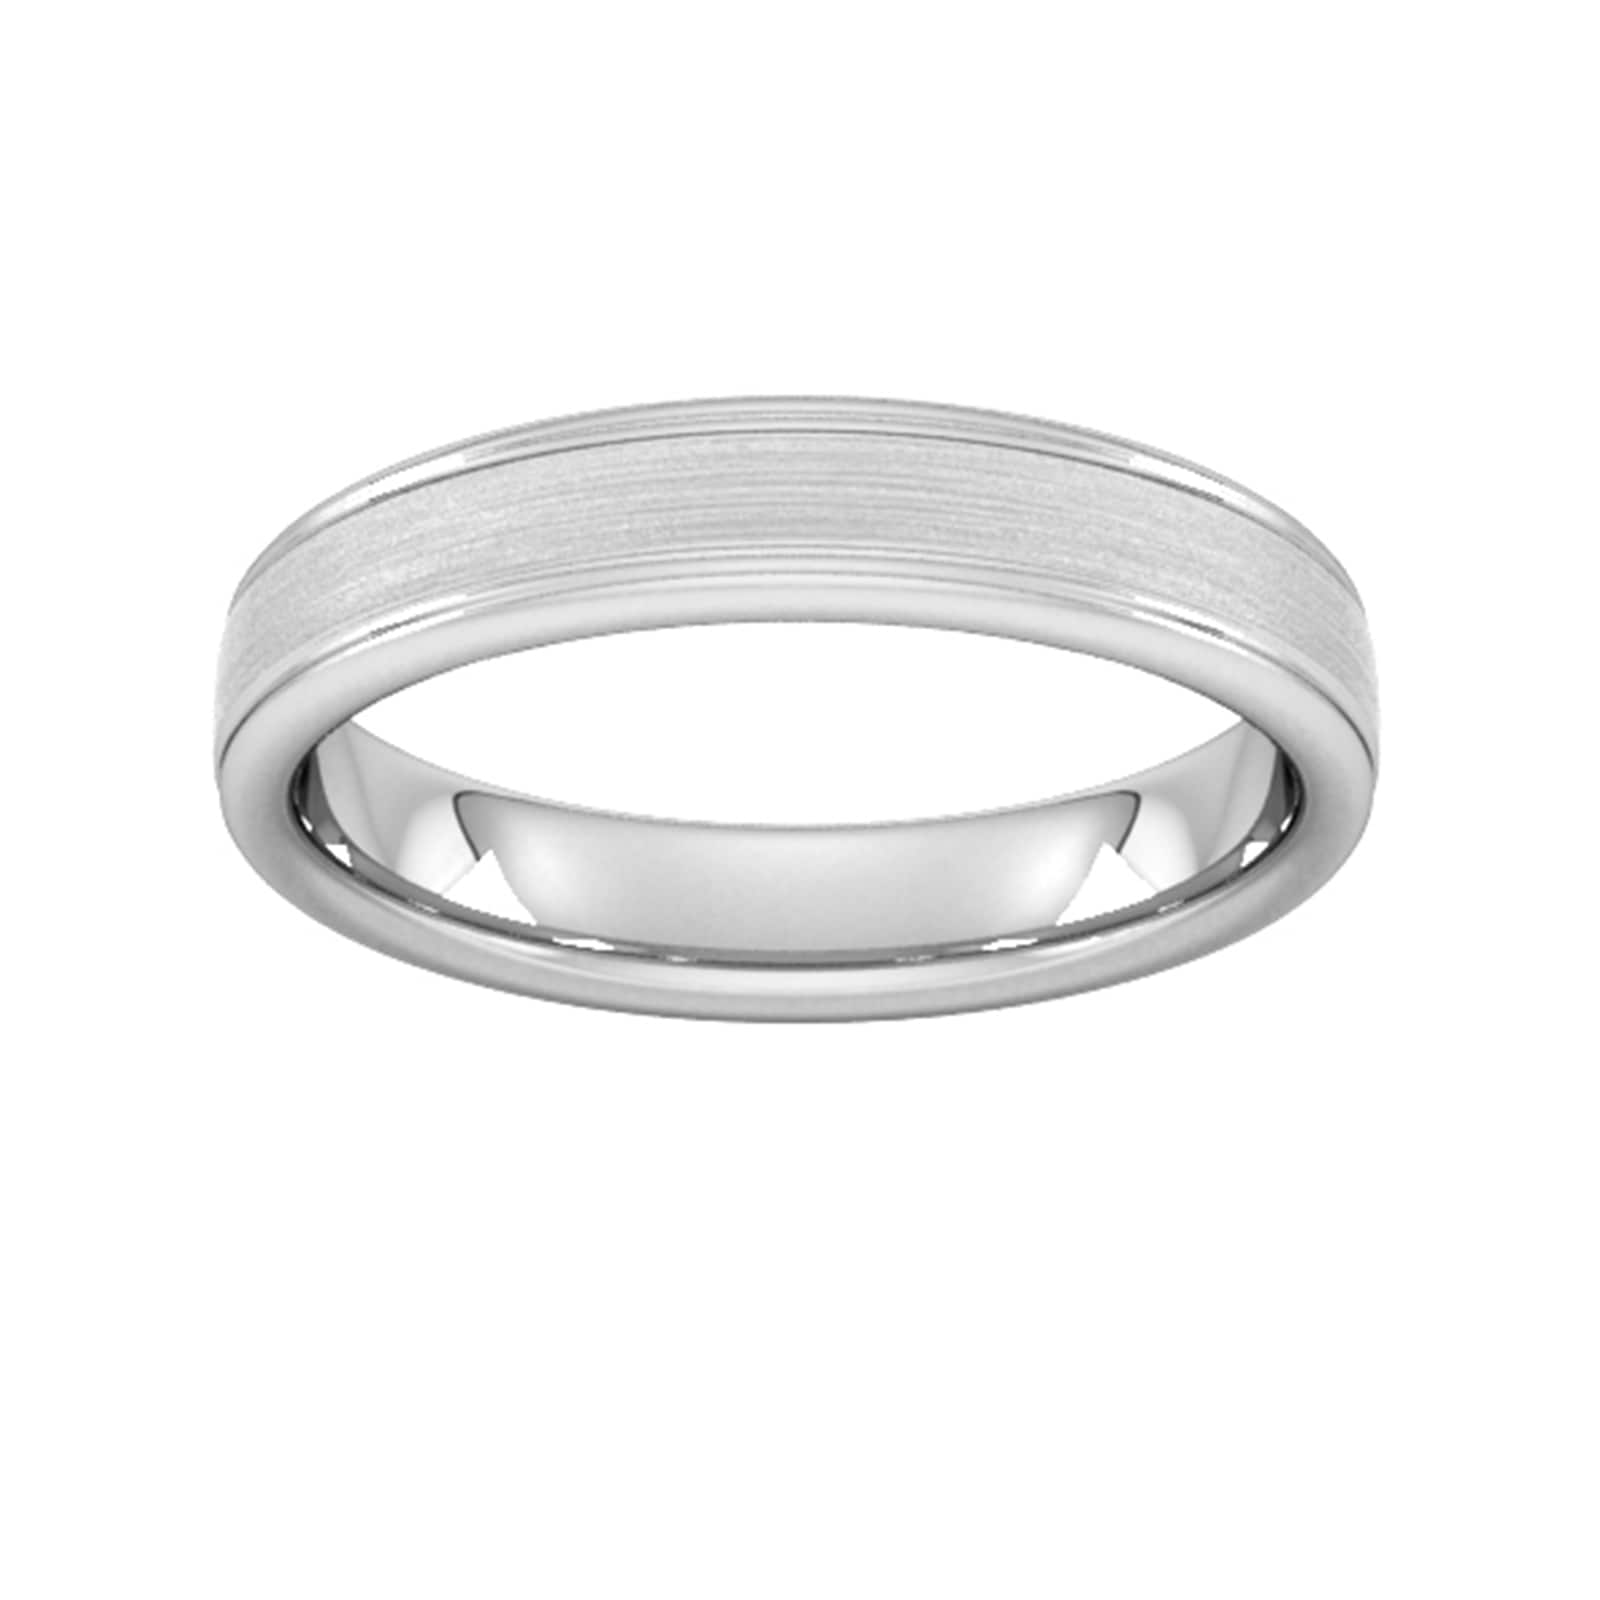 4mm Traditional Court Standard Matt Centre With Grooves Wedding Ring In 950 Palladium - Ring Size W